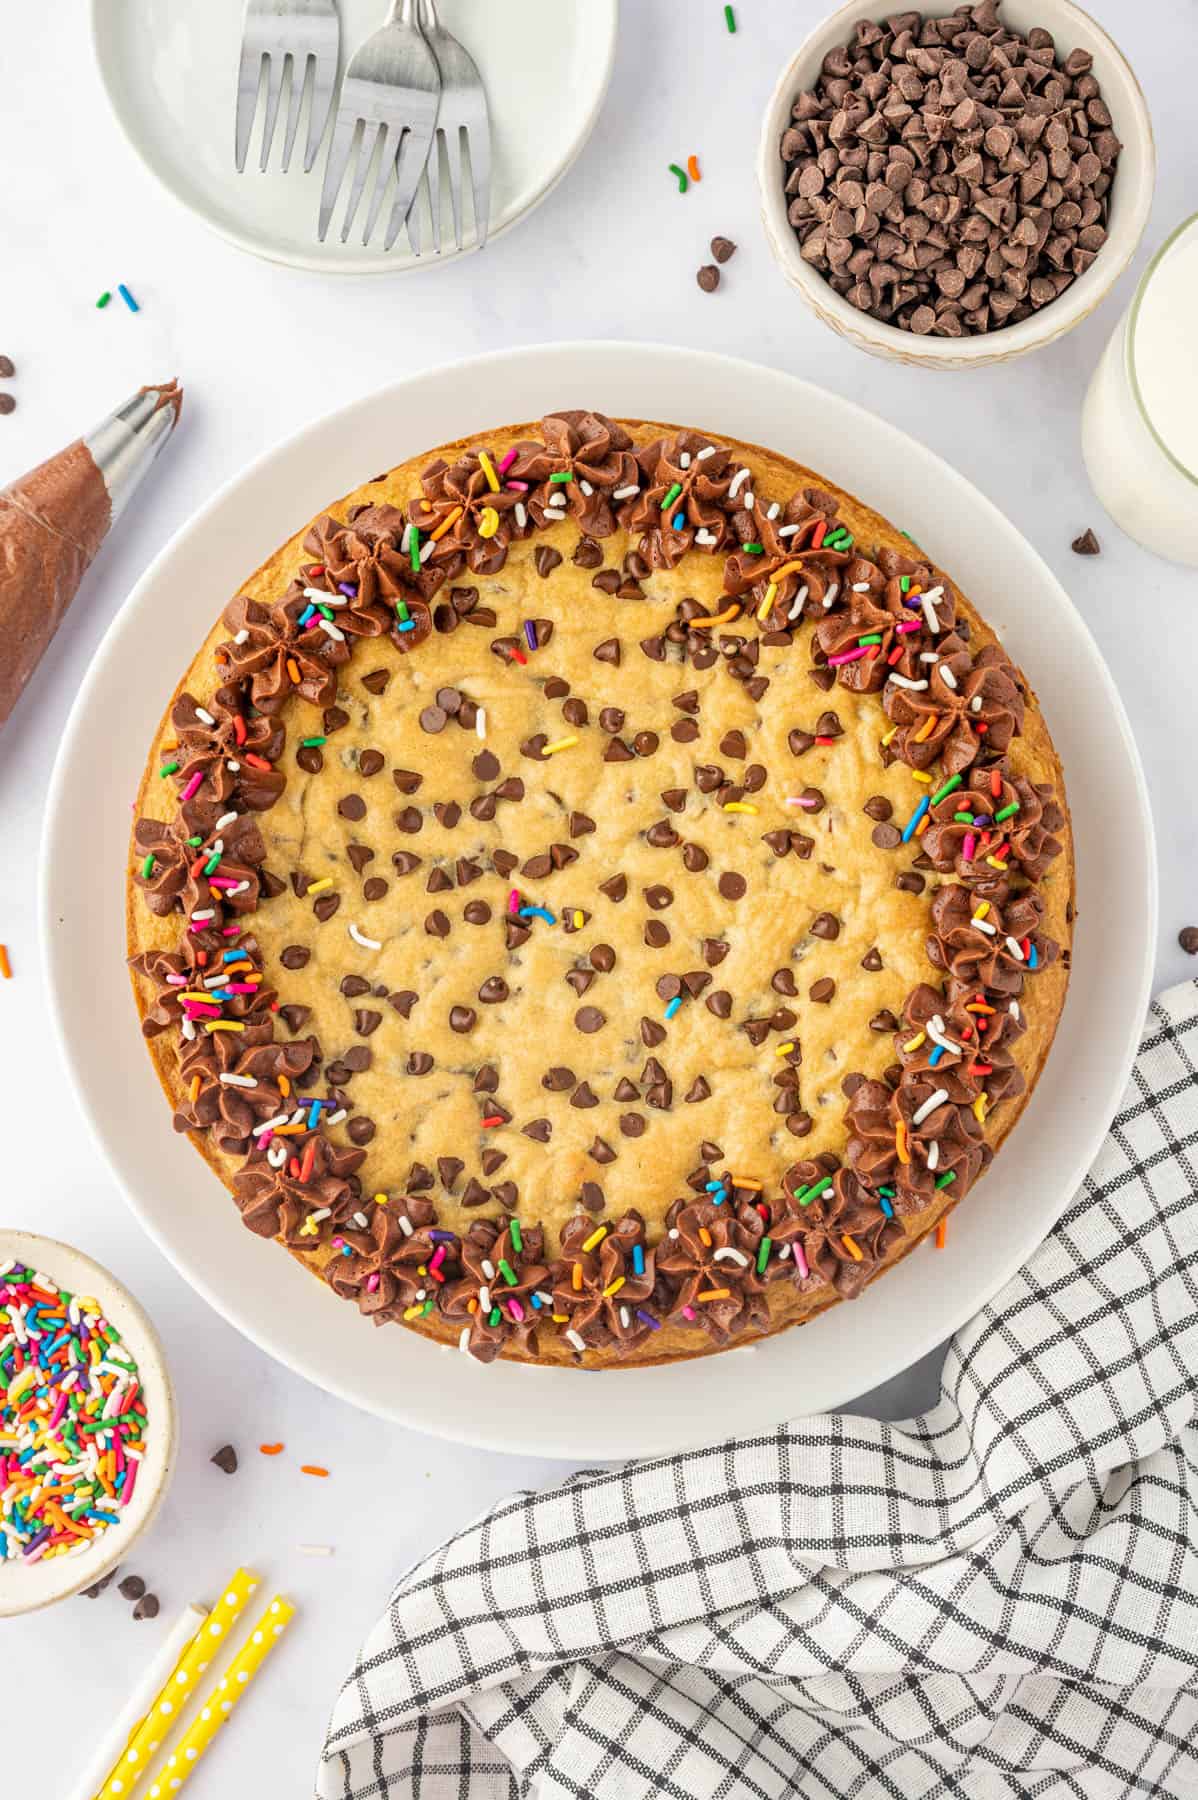 An overhead image of a chocolate chip cookie cake decorated with chocolate frosting and sprinkles.